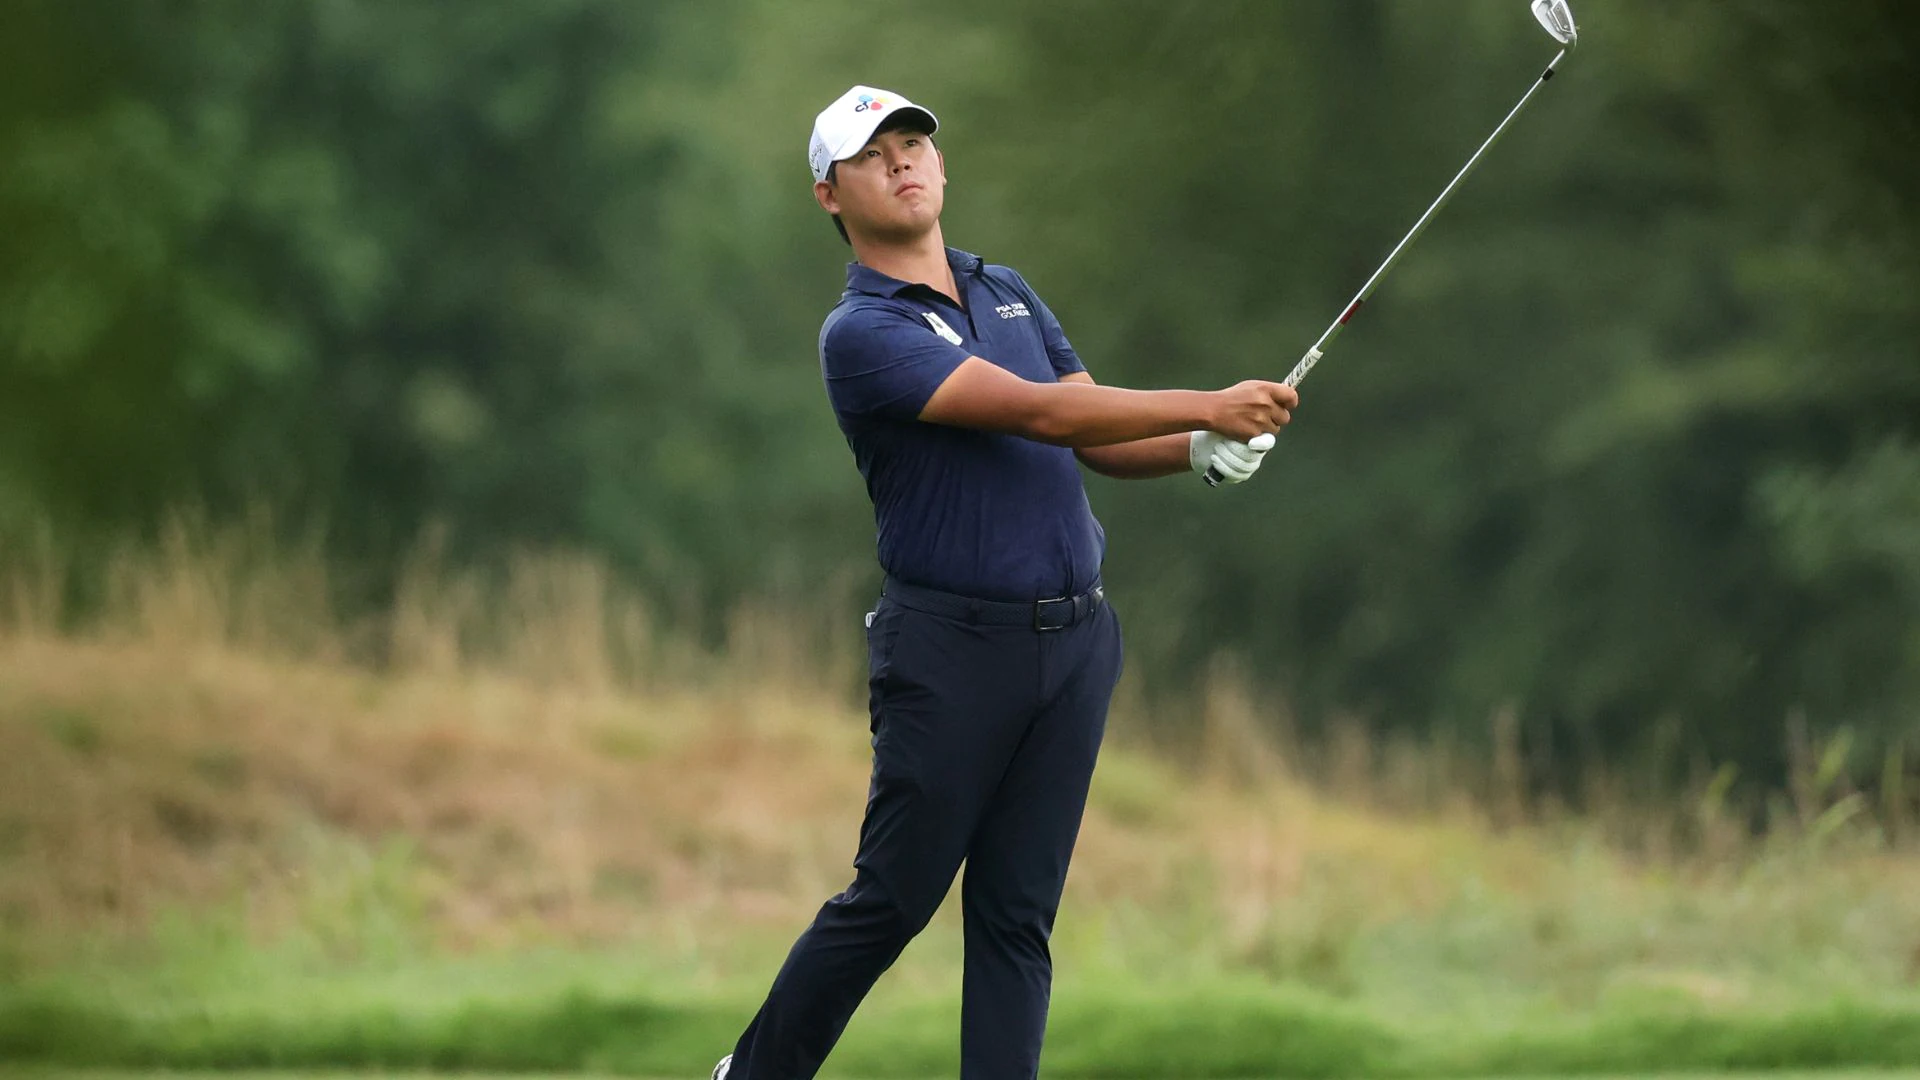 After mid-round grip change, hole-out finish, Si Woo Kim takes FedEx St. Jude lead